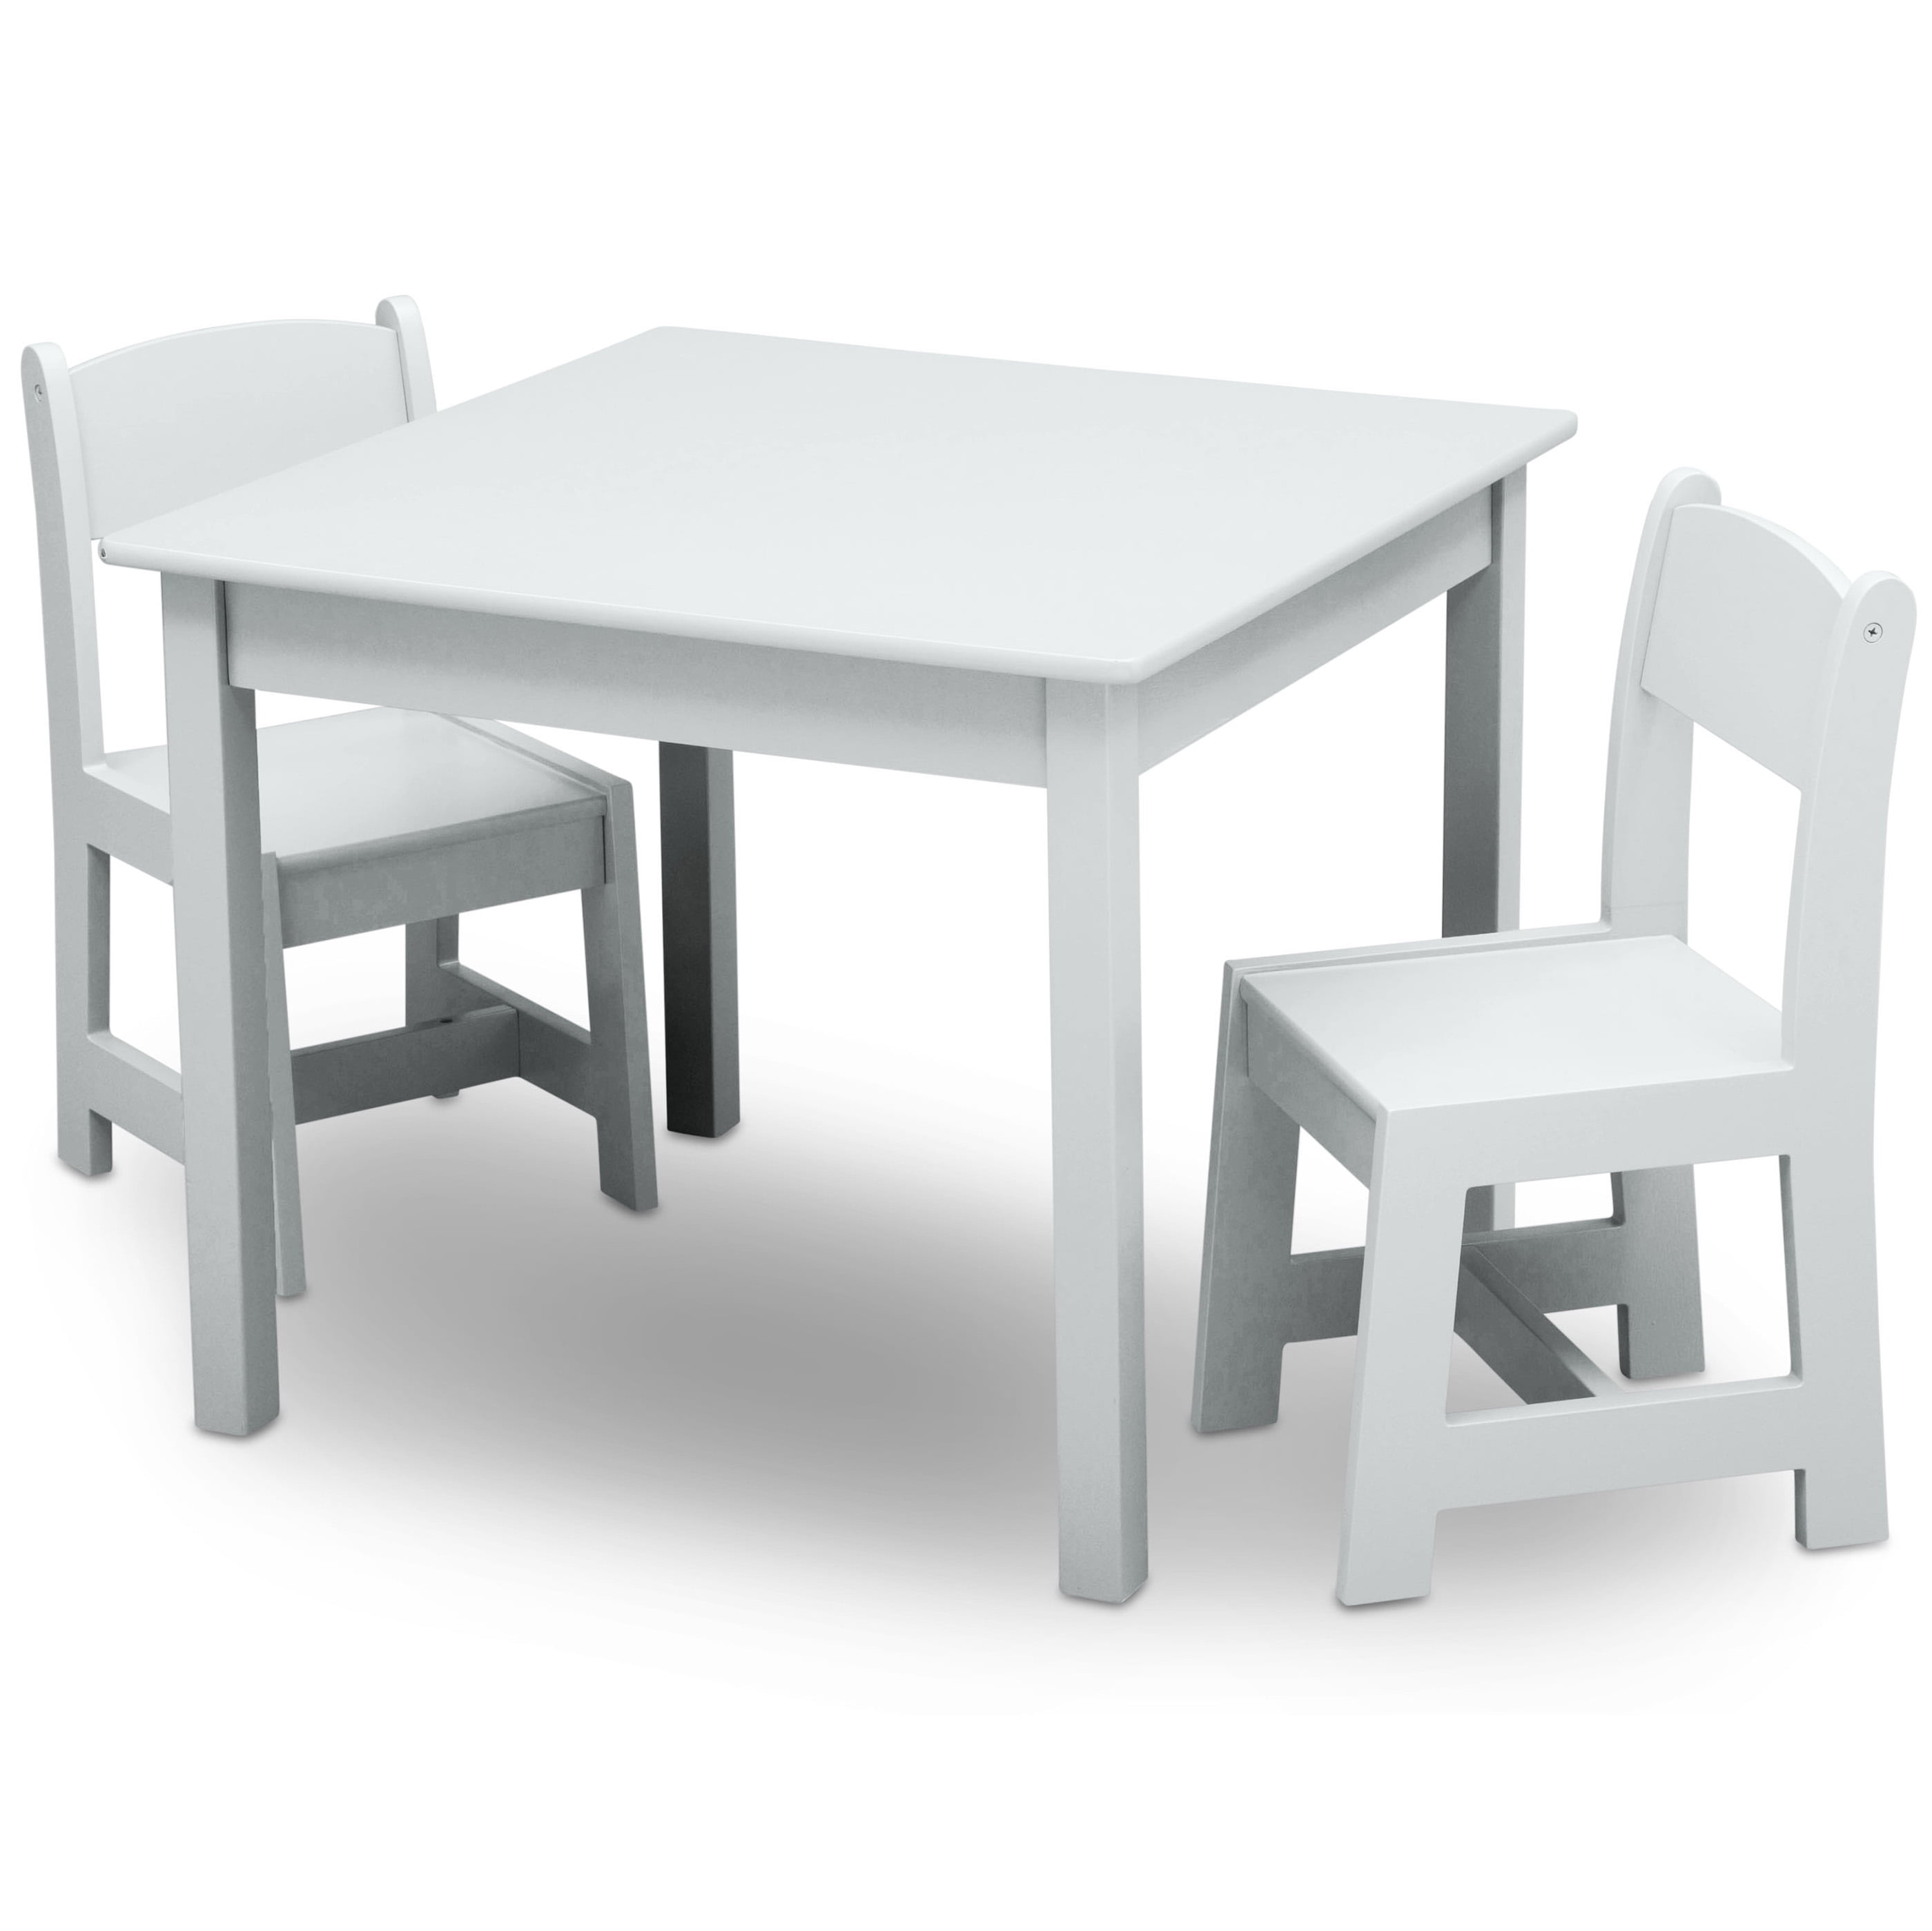 Delta Children MySize Kids Wood Table and Chair Set (2 Chairs Included) -  Greenguard Gold Certified, Bianca White